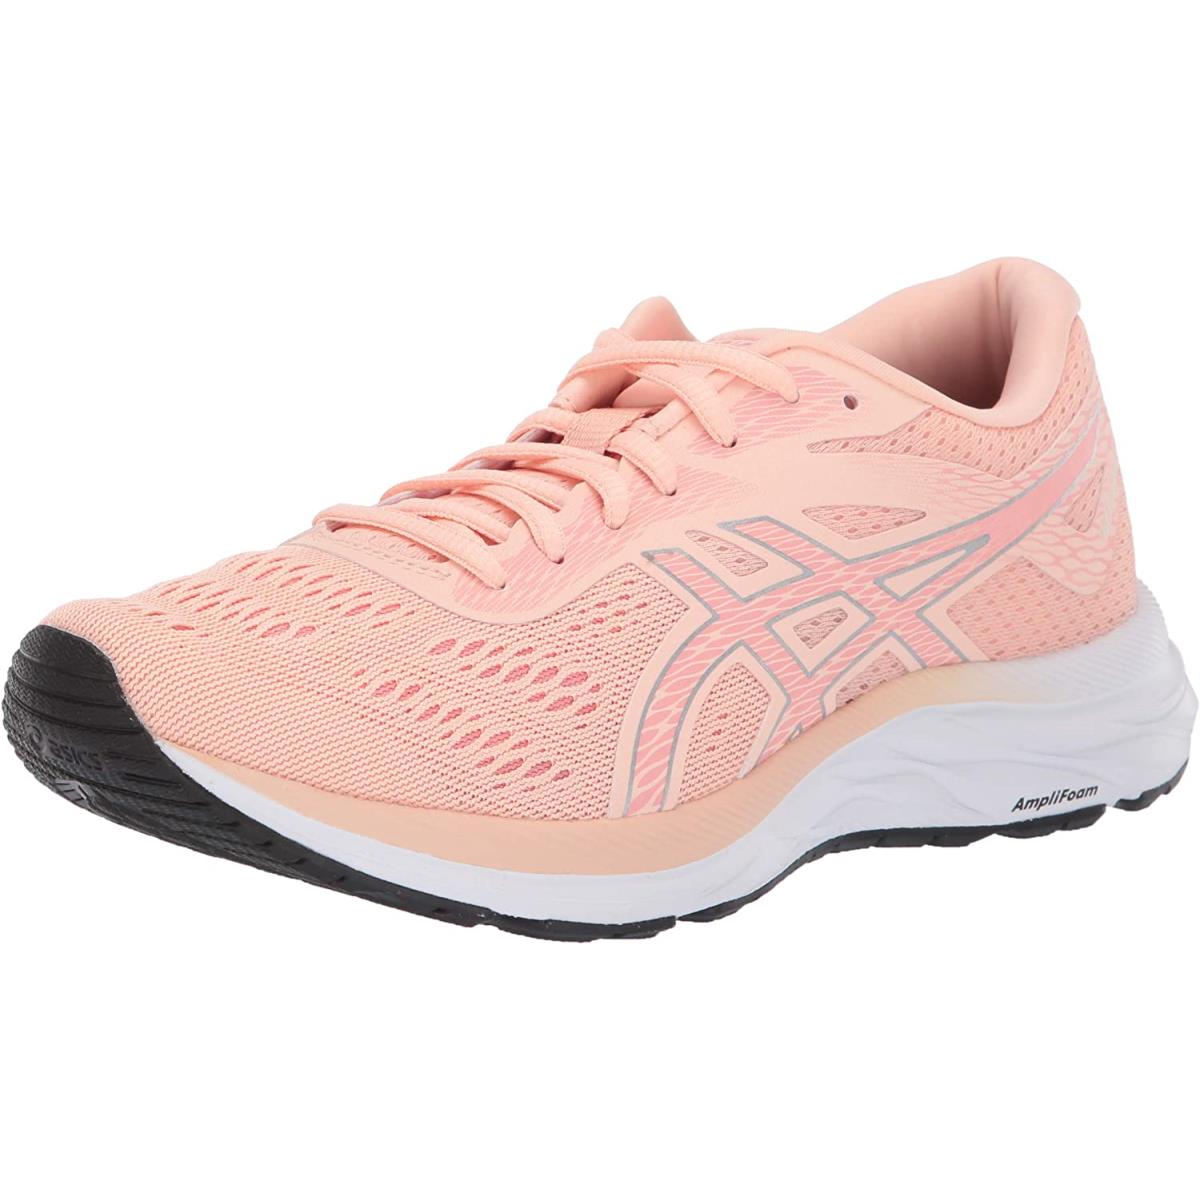 Asics Women`s Gel-excite 6 Running Shoes Bakedpink/Silver